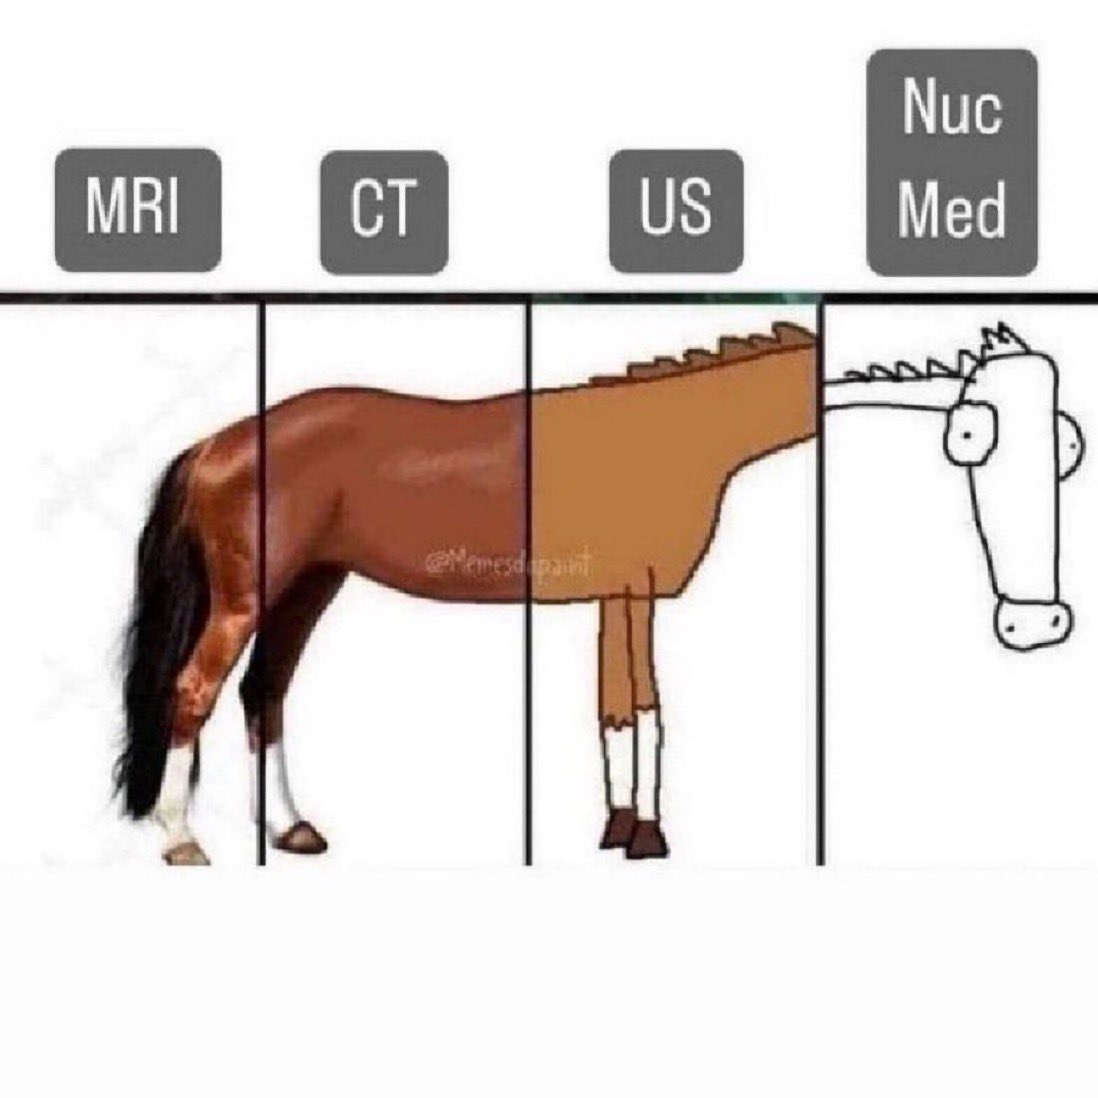 #Radiology humor…accurate 🐴